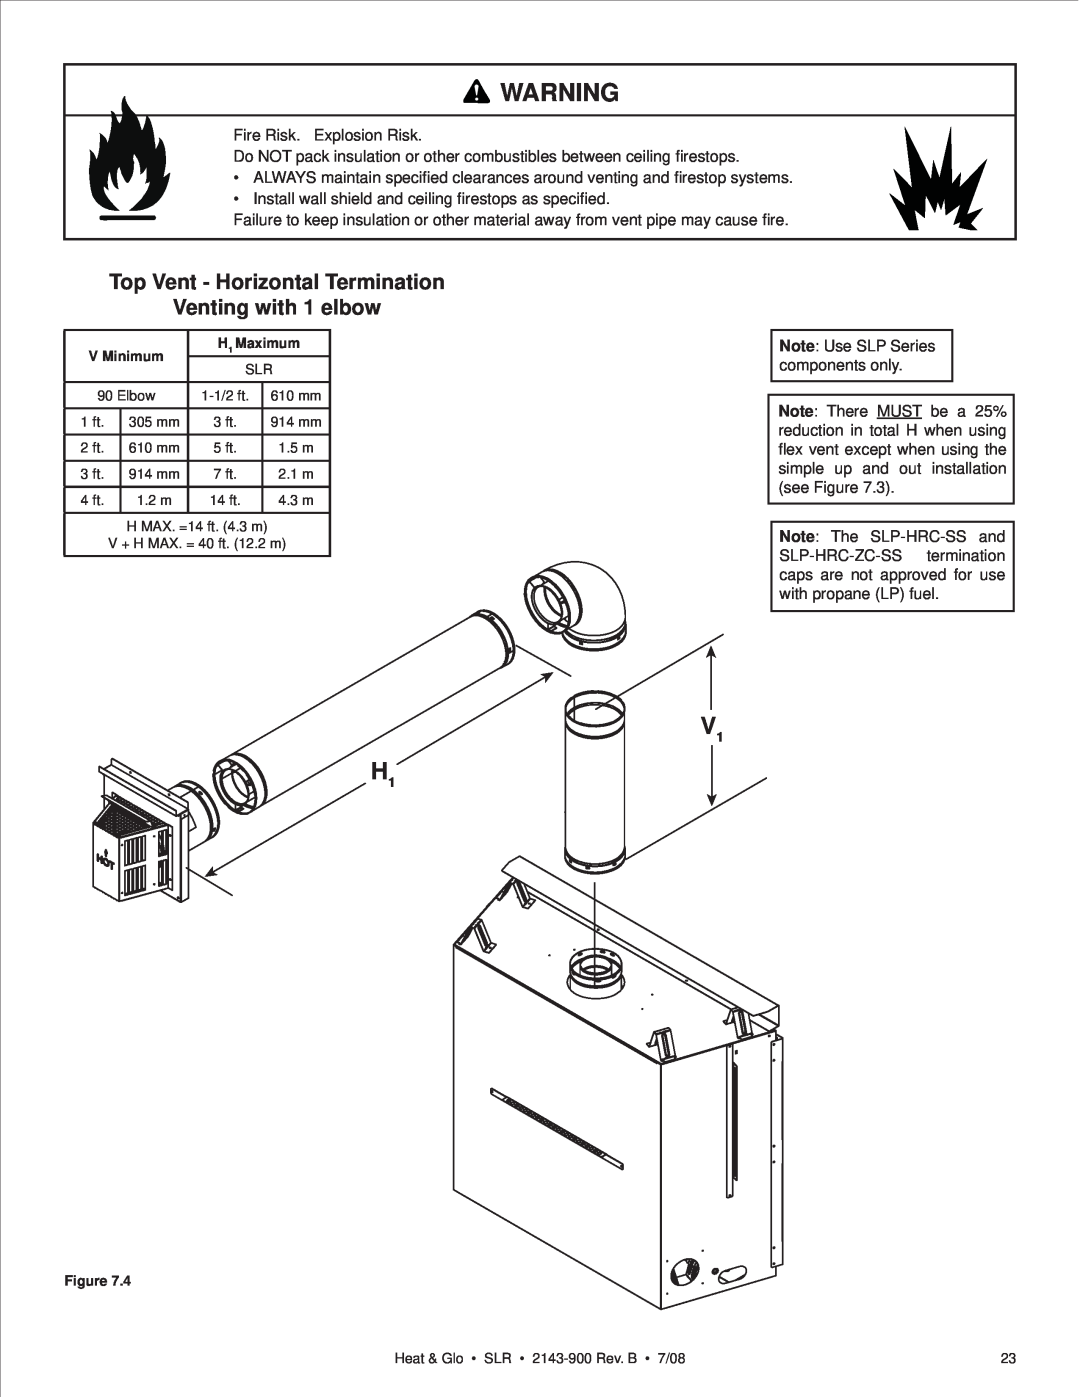 Heat & Glo LifeStyle SLR (COSMO) owner manual Top Vent - Horizontal Termination, Venting with 1 elbow 